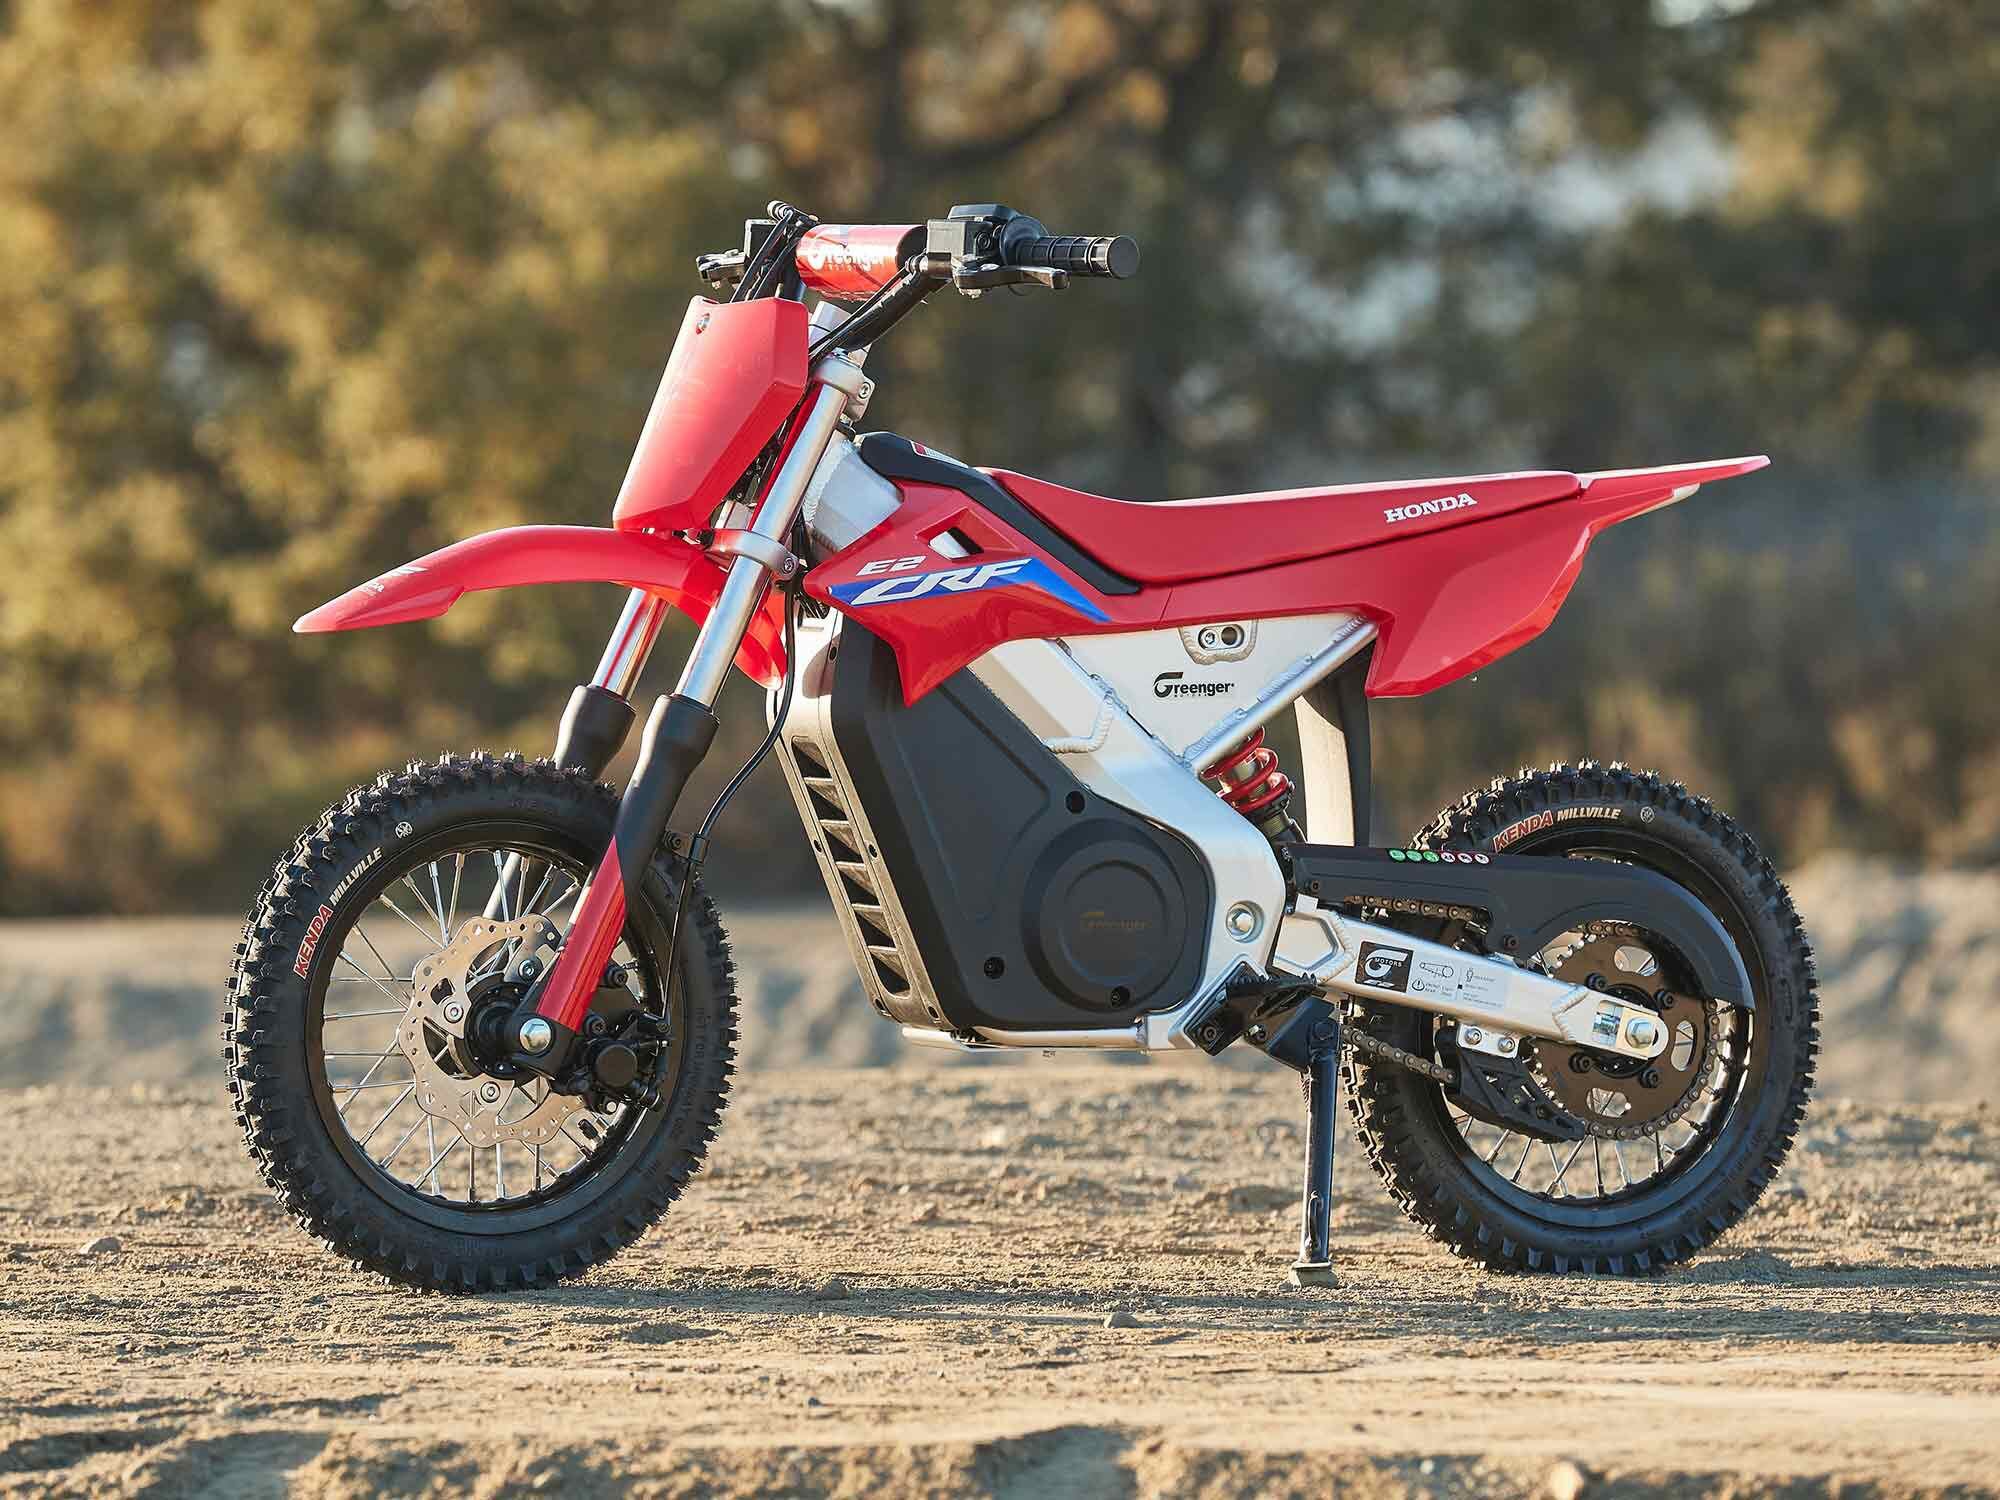 The half-pint take on Honda’s bigger CRF models features 12-inch wire wheels shod with Kenda Millville knobbies.